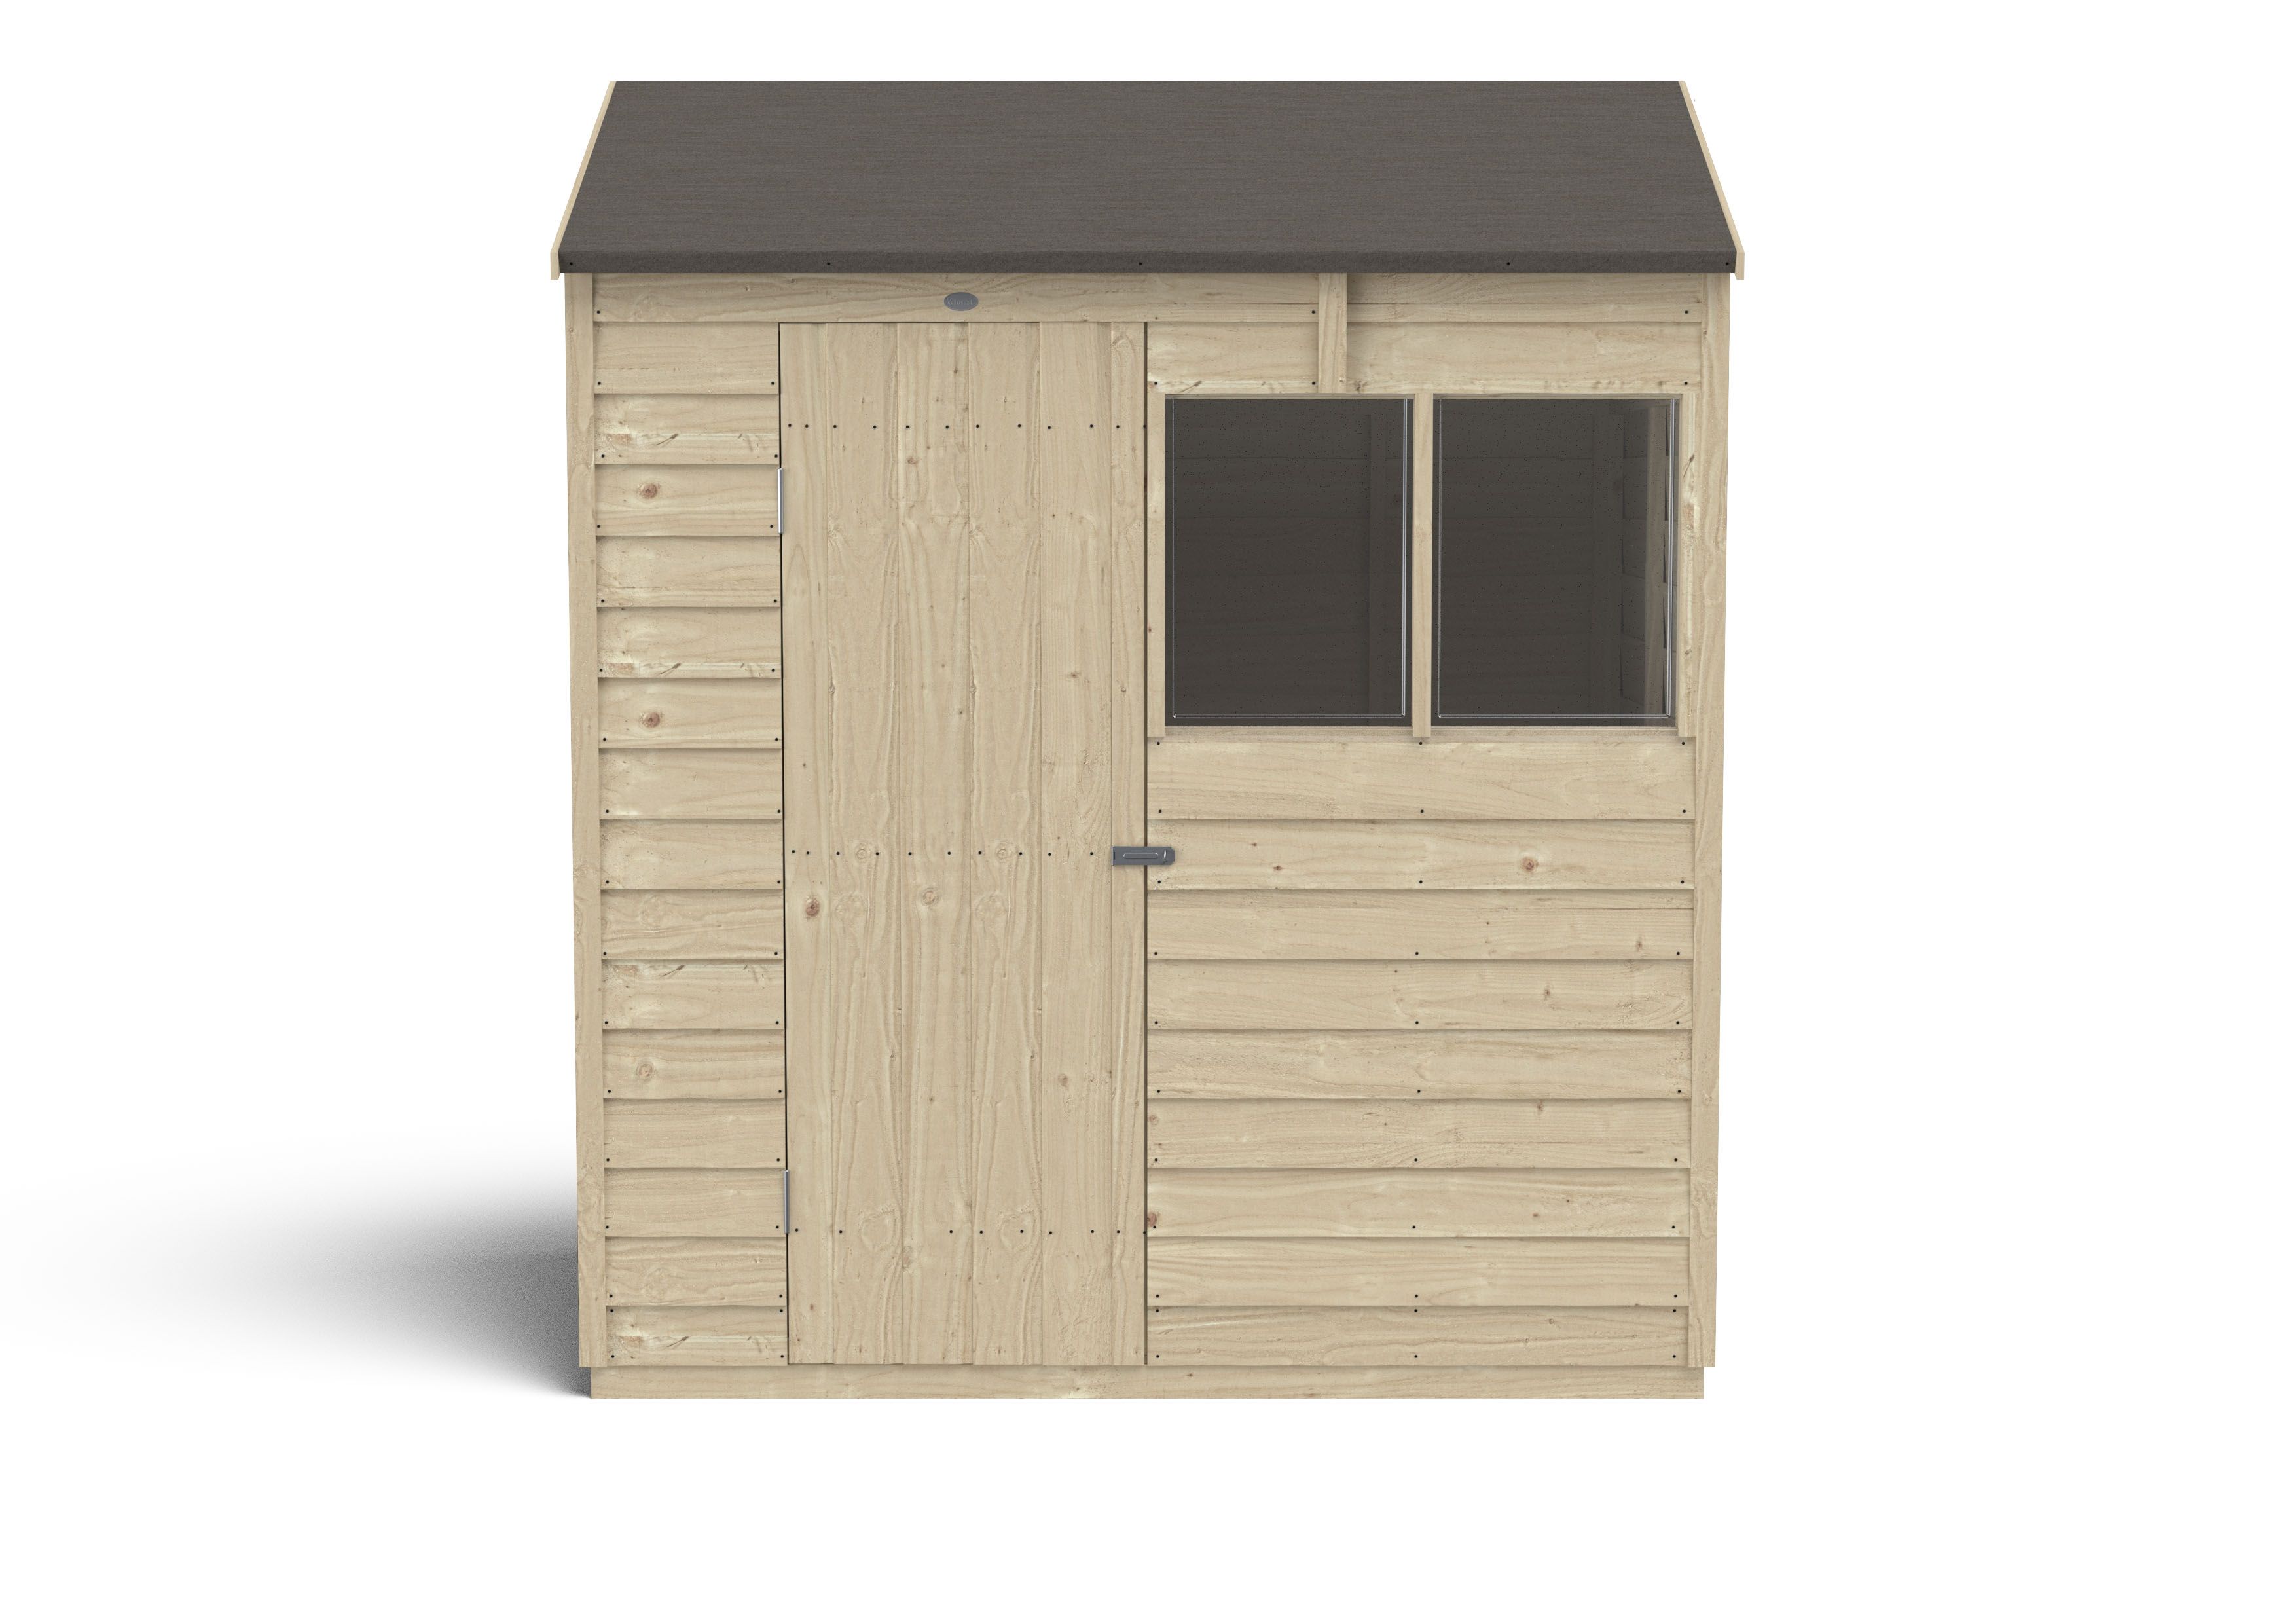 Forest Garden Overlap 6x4 ft Reverse apex Wooden Pressure treated Shed with floor & 2 windows